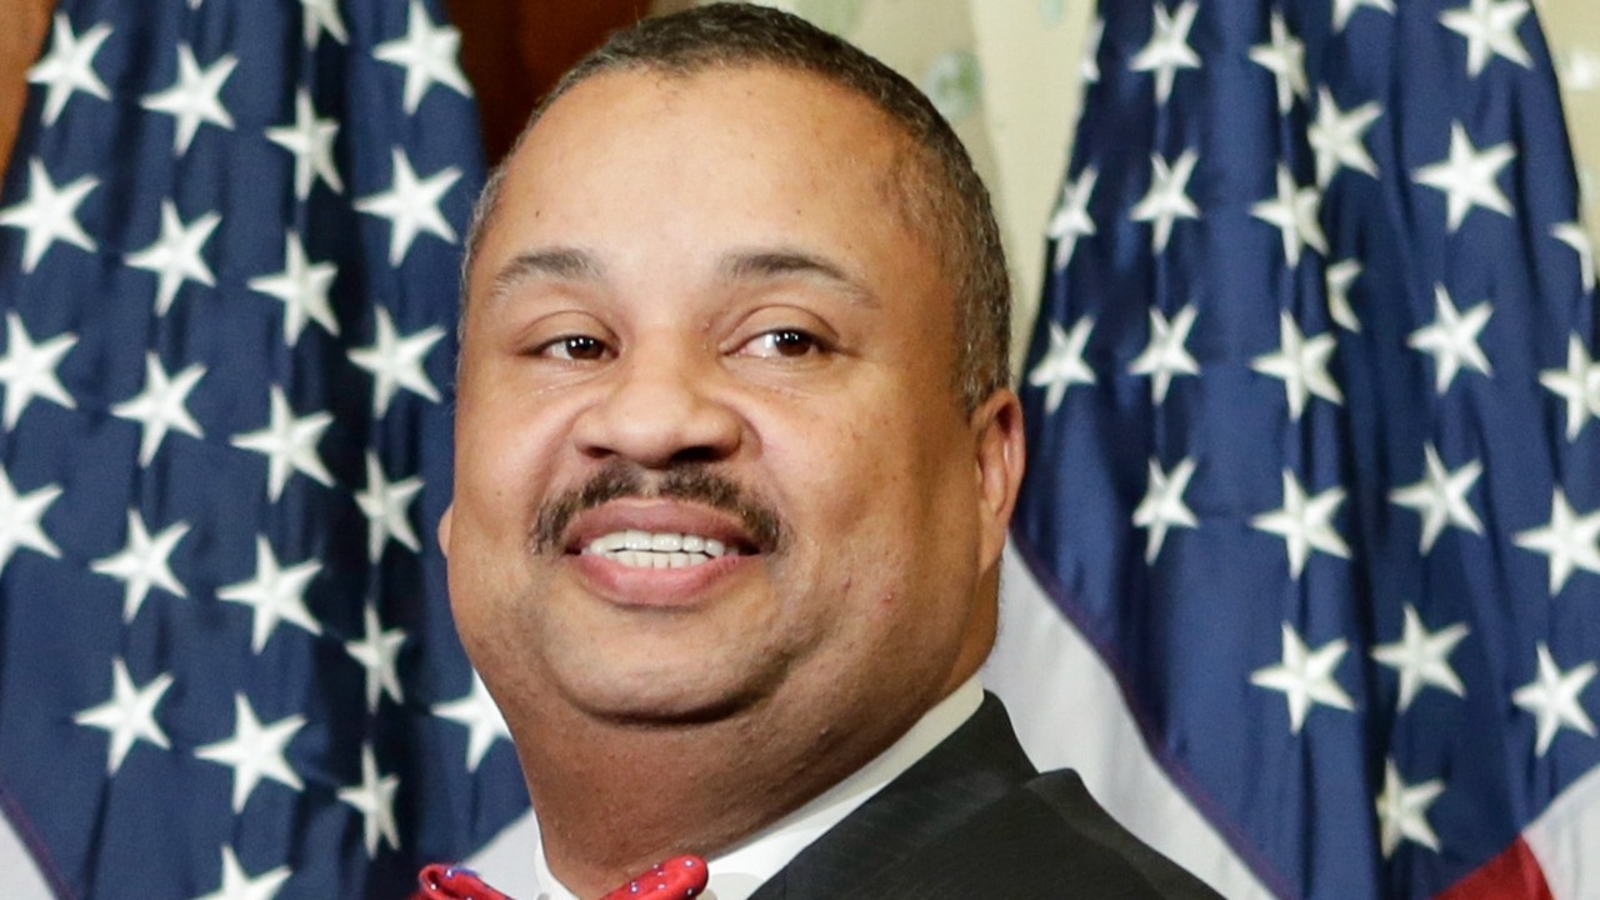 Mourners gather for funeral of late New Jersey Congressman Donald Payne, Jr. in Newark [Video]